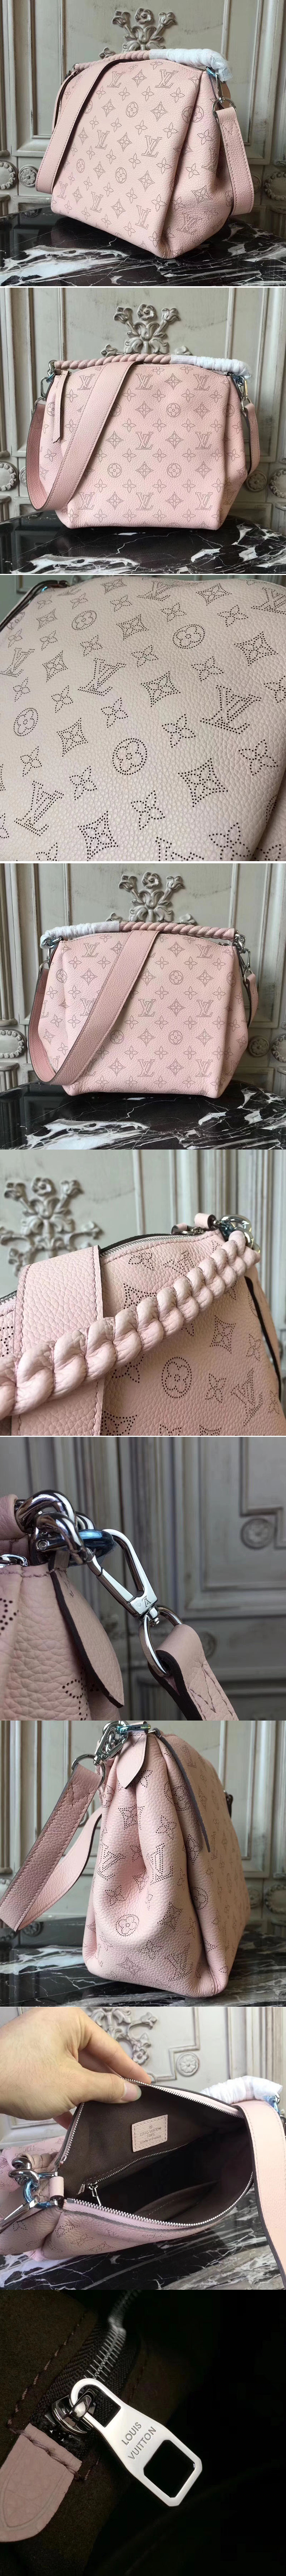 Replica Louis Vuitton M51219 Babylone Chain BB Mahina Leather Bags Pink